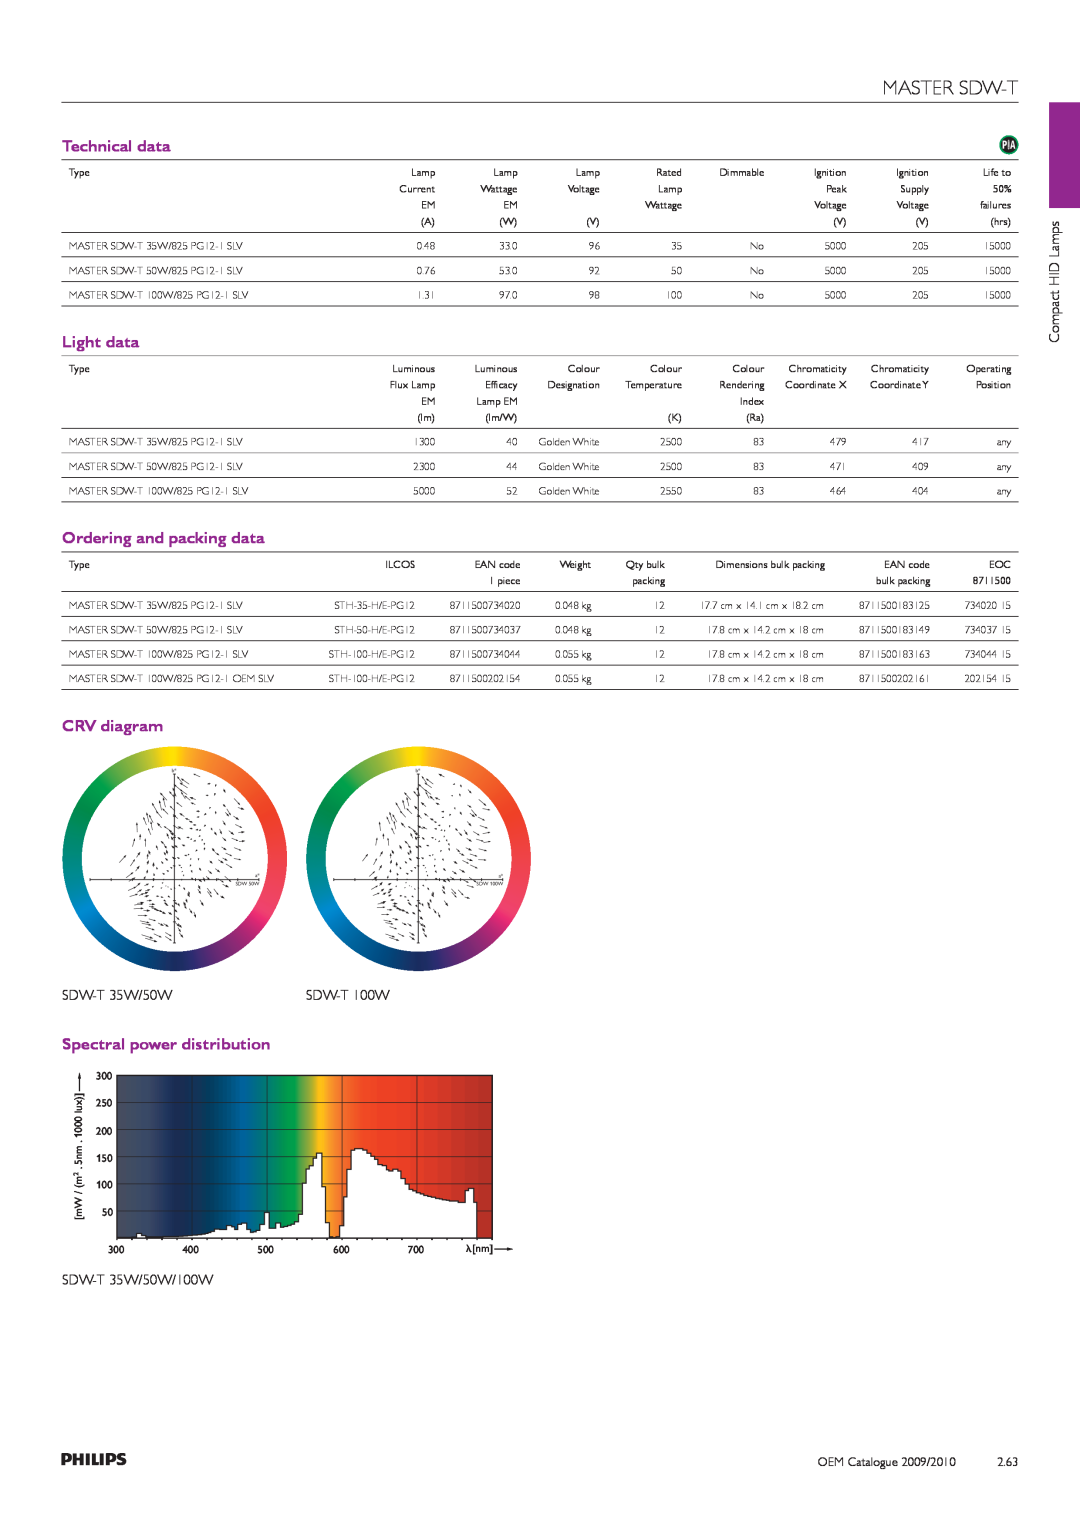 Philips Compact HID Lamp and Gear manual Master Sdw-T, Technical data, Light data, Ordering and packing data, CRV diagram 